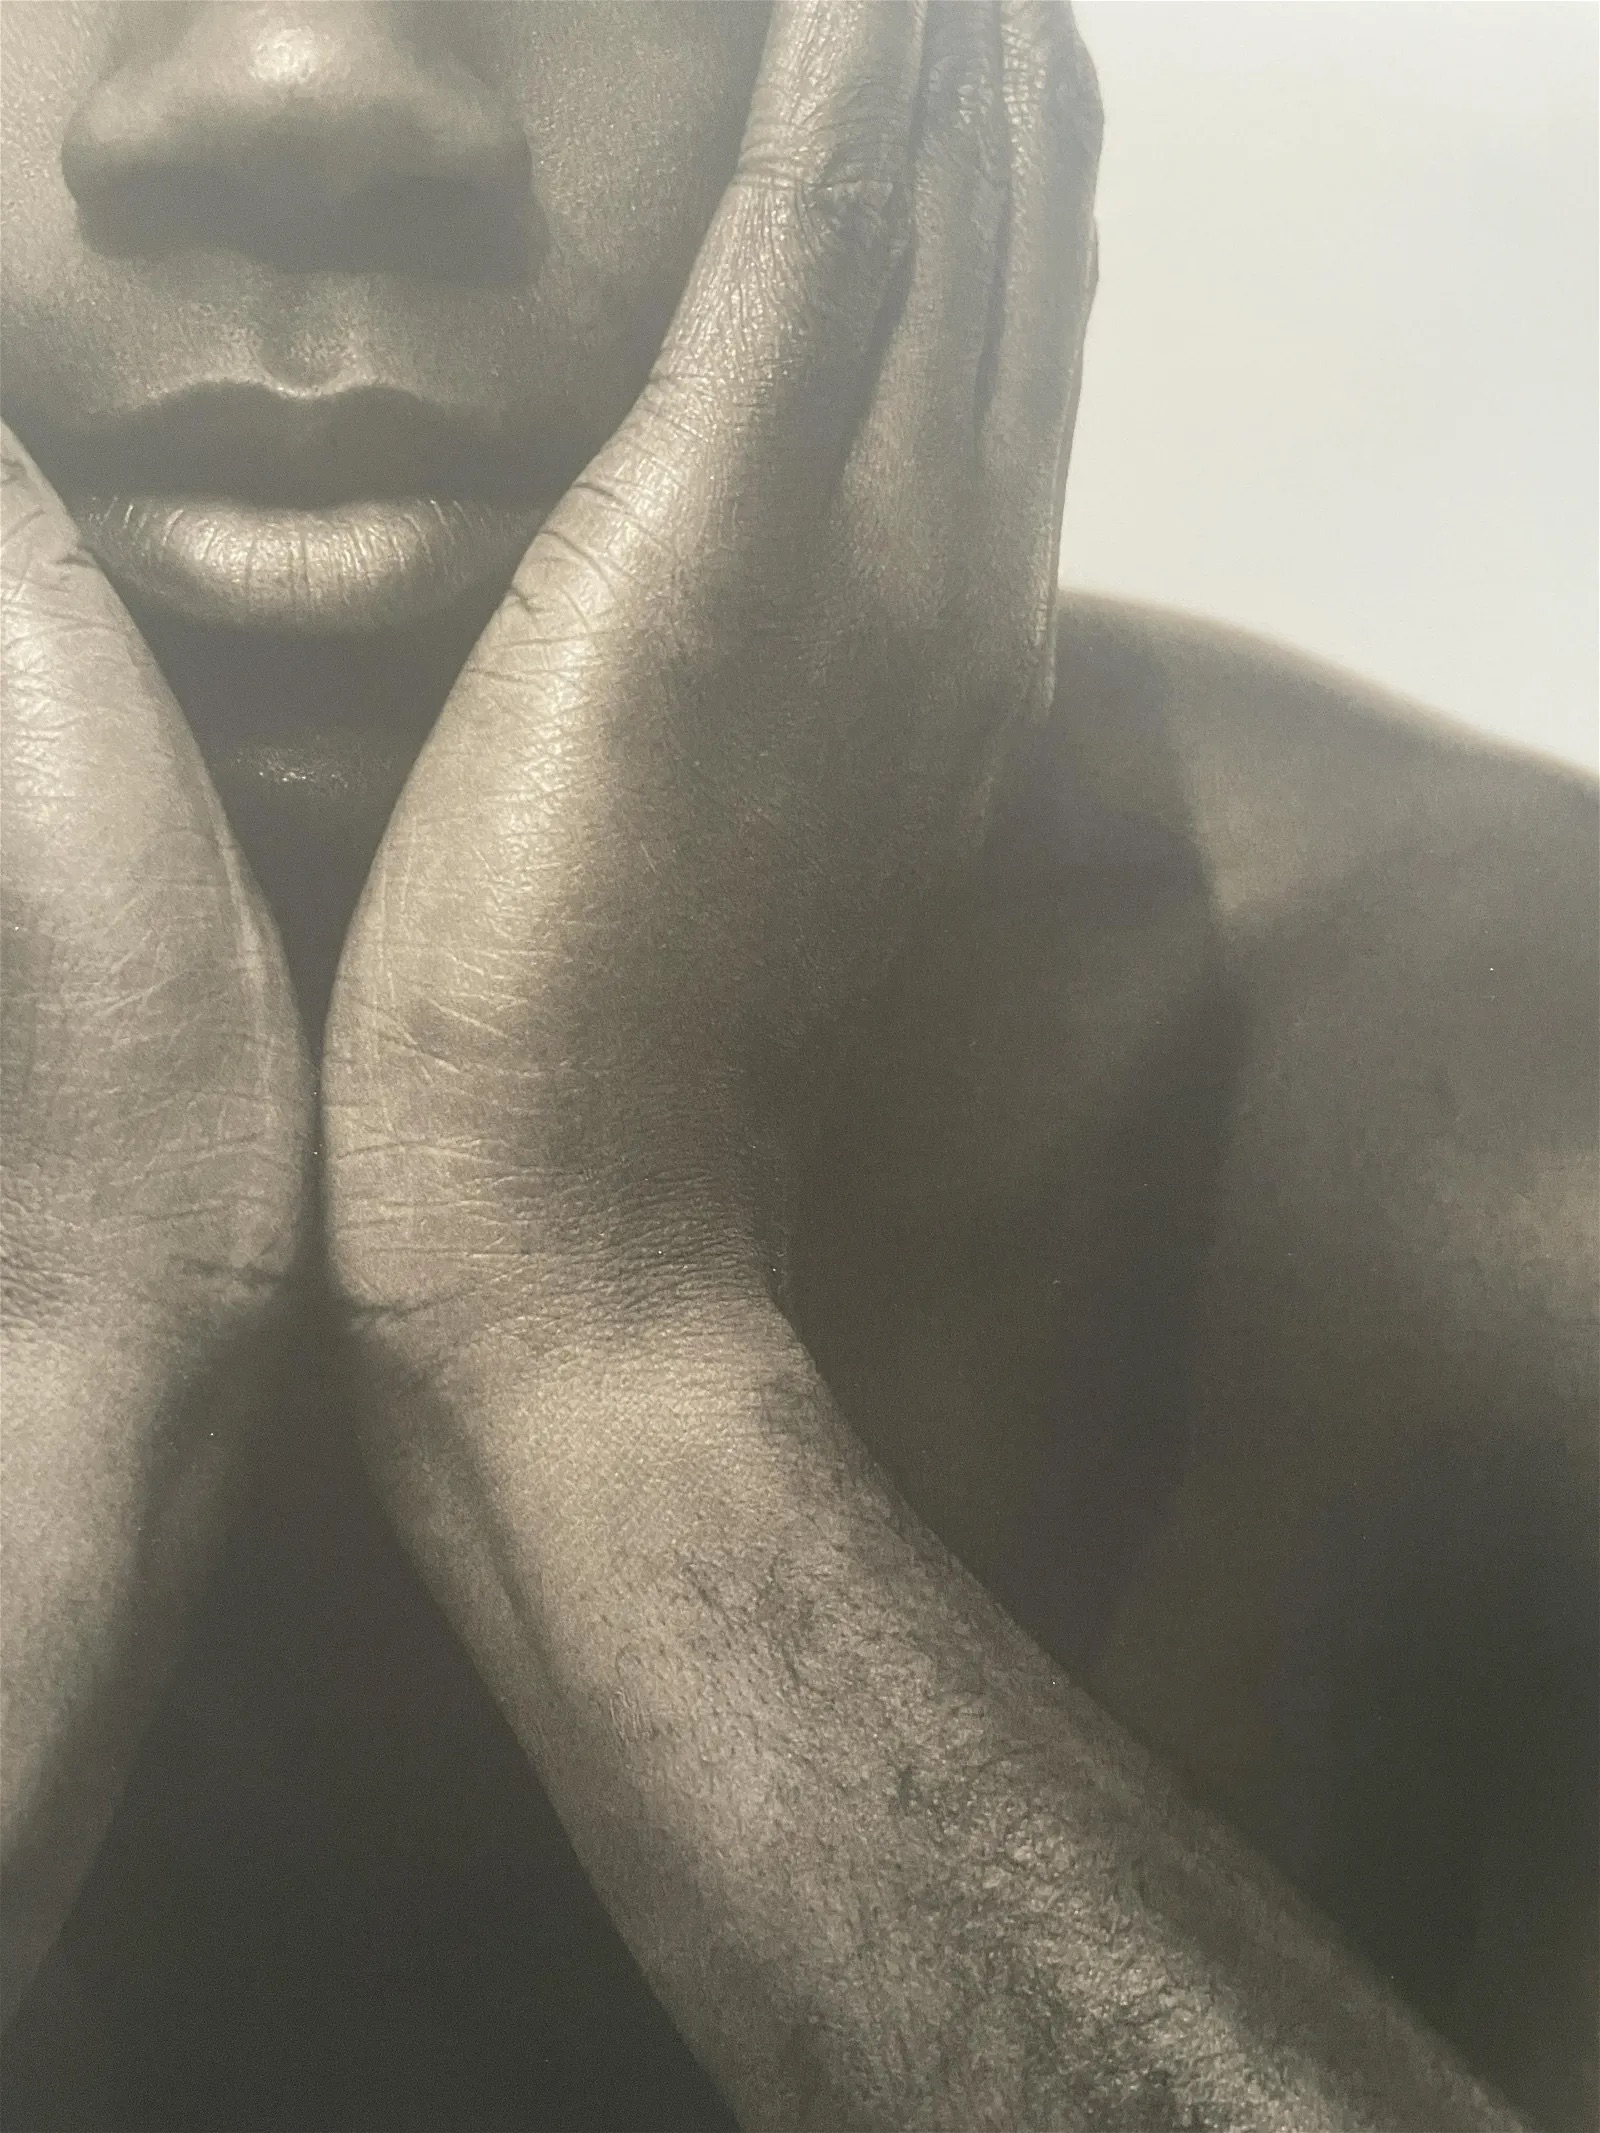 Herb Ritts "Earvin Magic Johnson, Hollywood, 1992" Print - Image 4 of 5